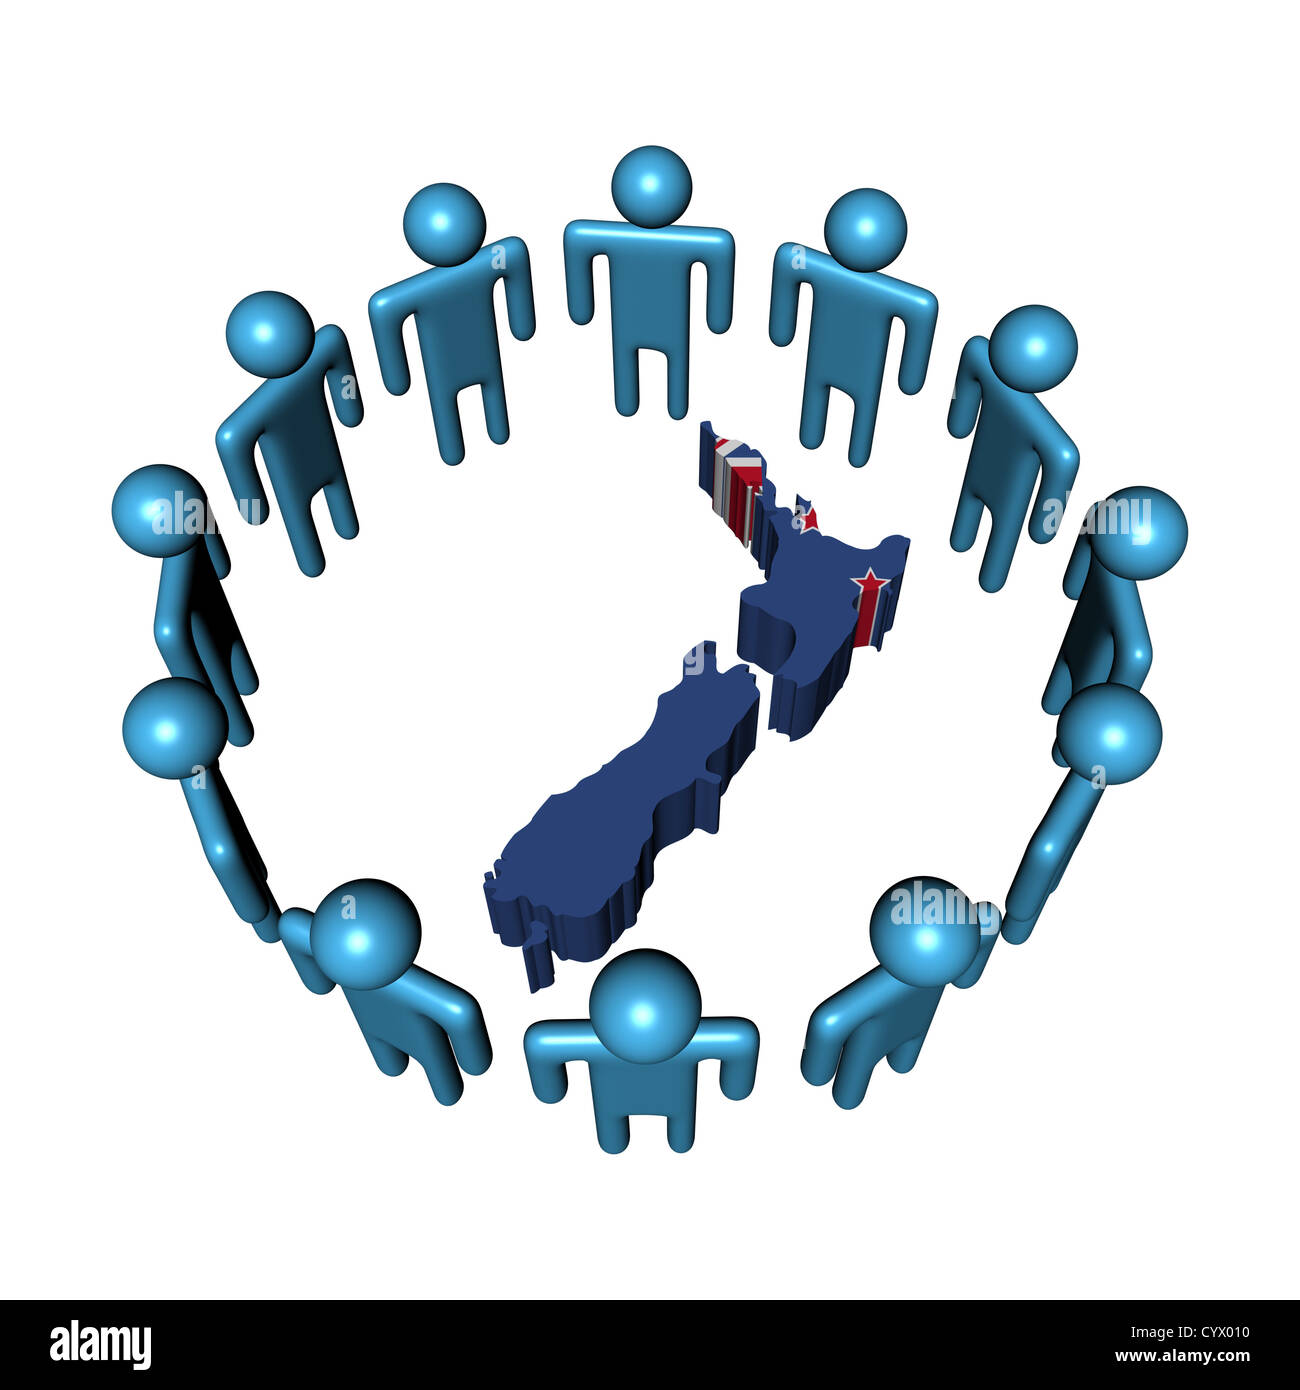 Circle of abstract people around New Zealand map flag illustration Stock Photo